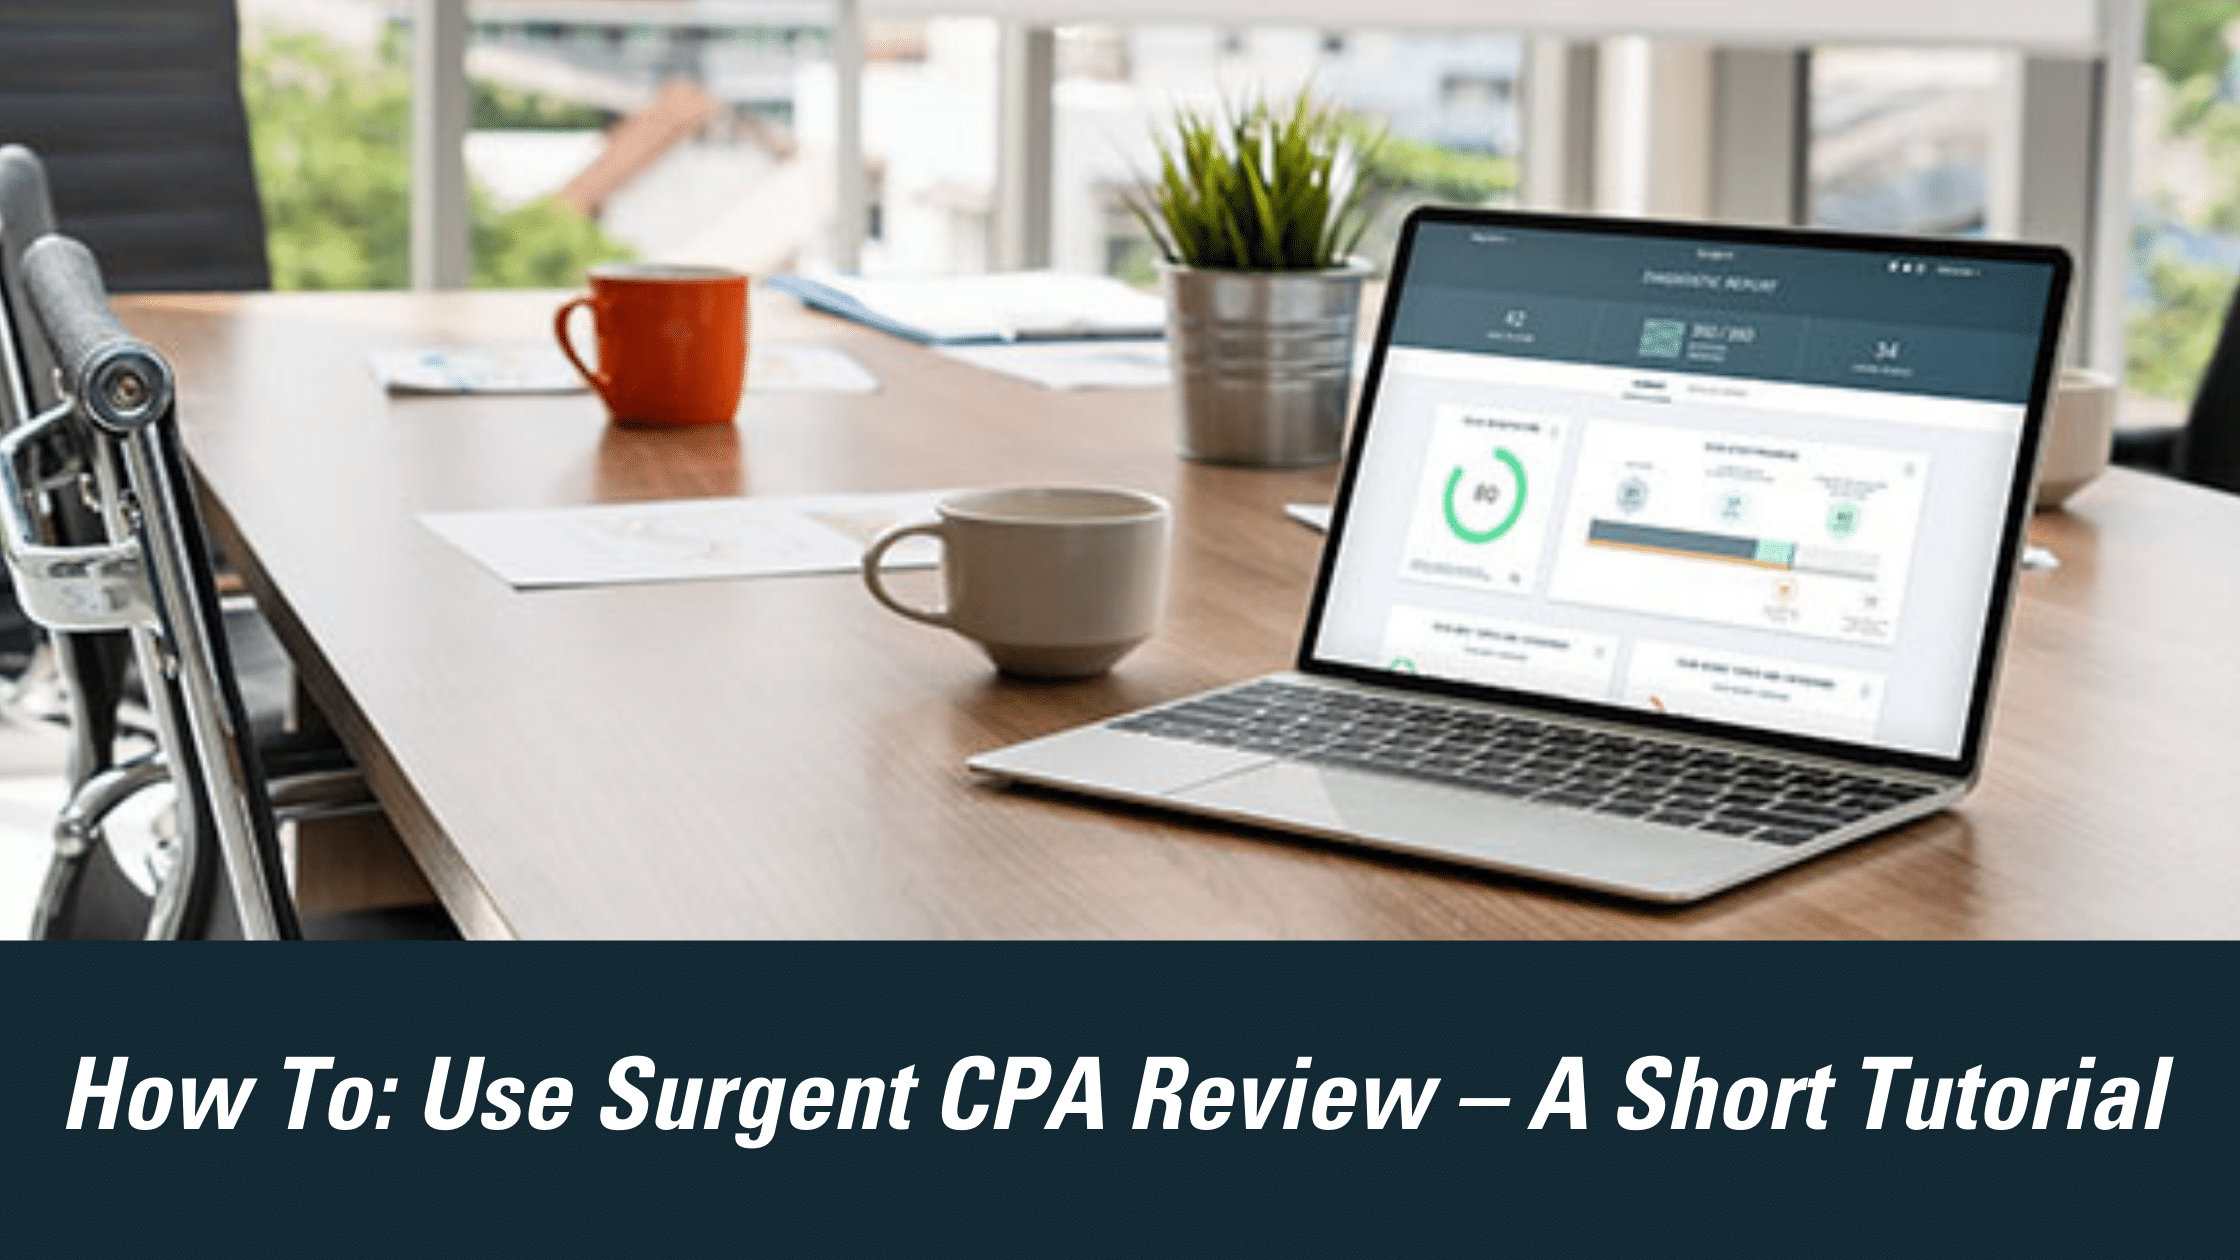 How To: Use Surgent CPA Review – A Short Tutorial